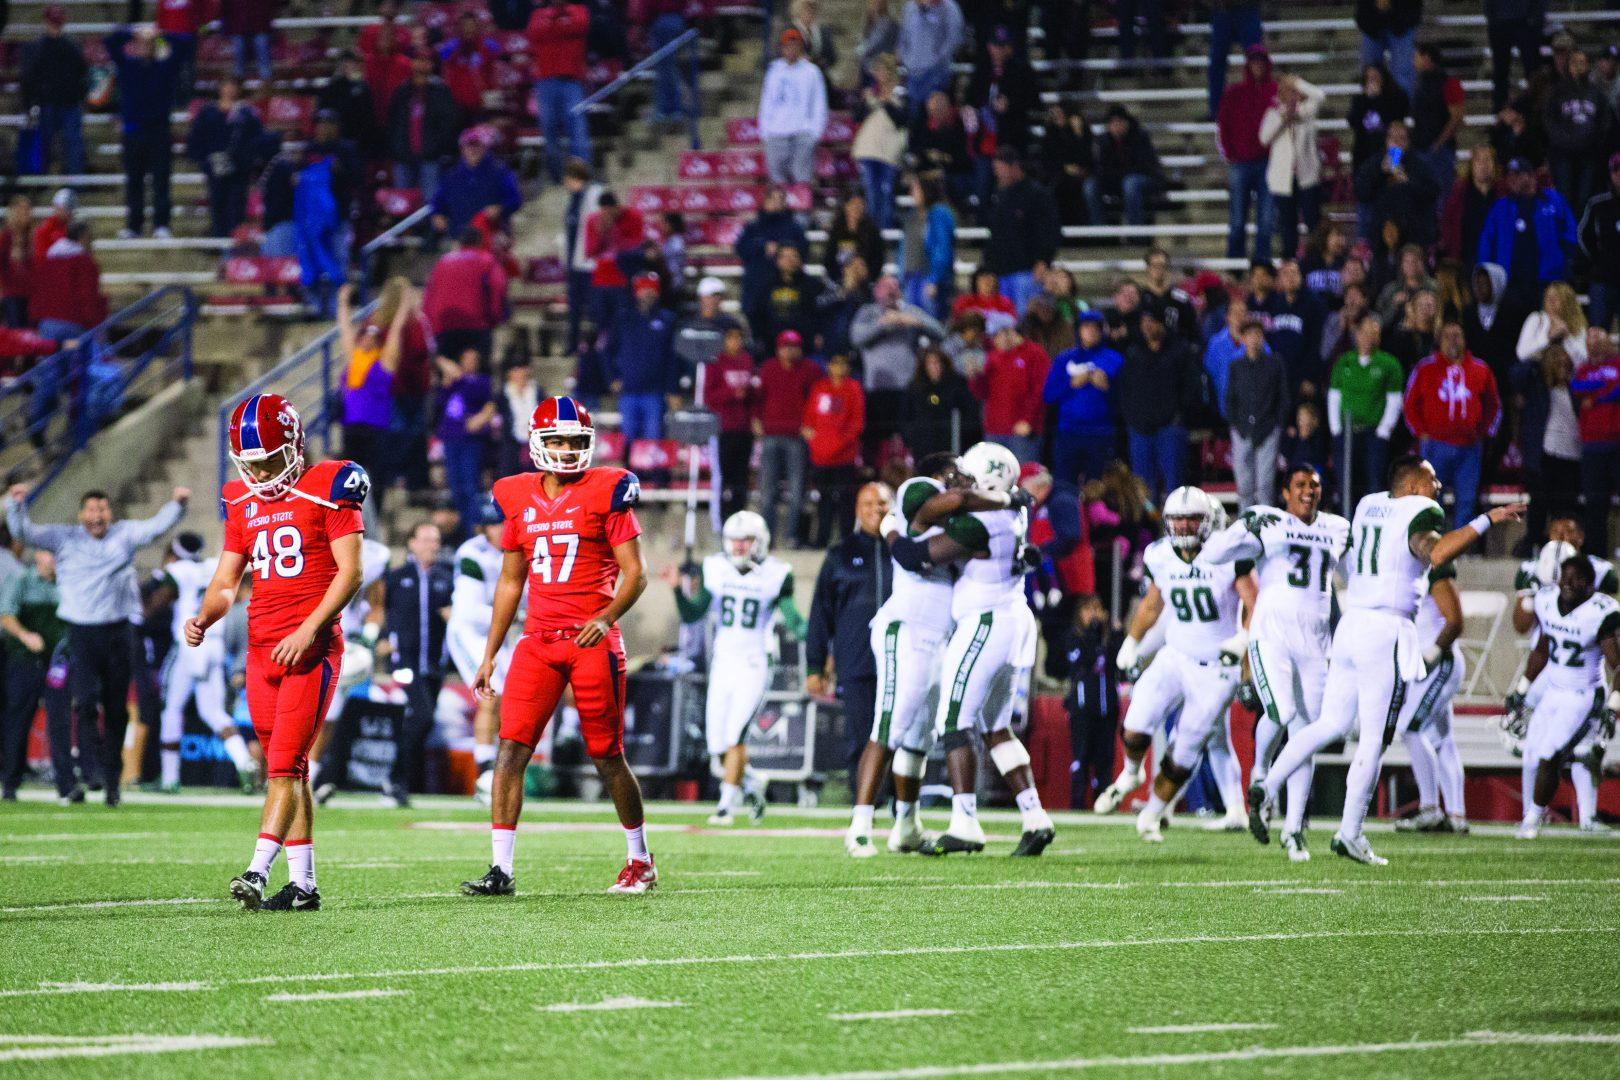 Hawai’i celebrates after Fresno State kicker Kody Kroening (#48) has his potential game-winning field goal blocked resulting in a 14-13 loss for the Bulldogs on Saturday night at Bulldog Stadium. (Christian Ortuno/The Collegian)